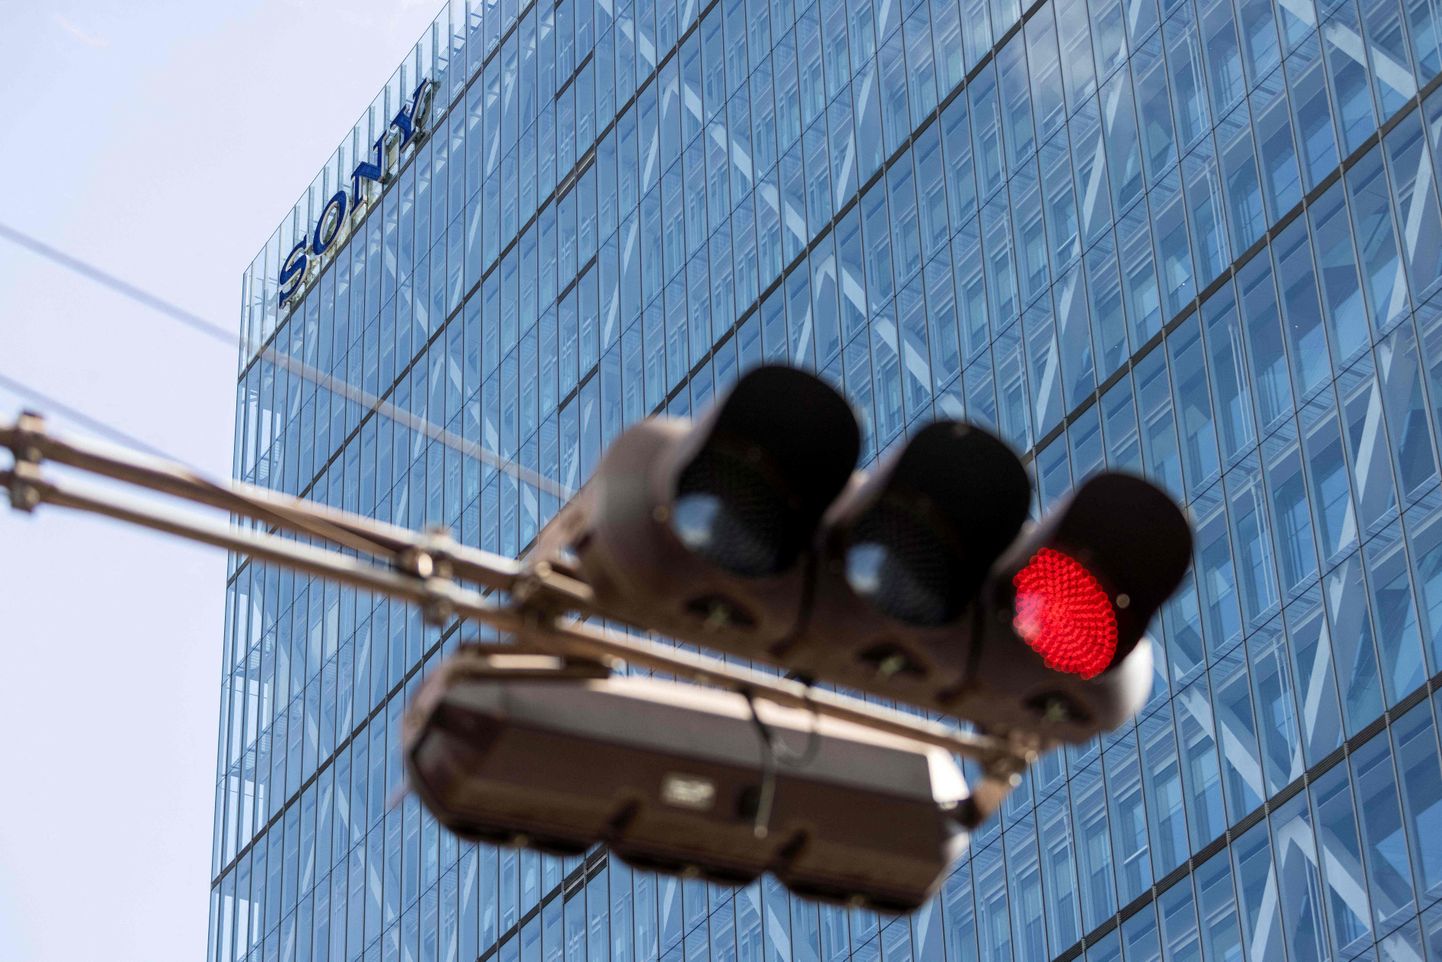 A traffic red light is photographed in front of the logo of Japanese tech giant Sony on the company's headquarters building in Tokyo on February 2, 2022. (Photo by Behrouz MEHRI / AFP)